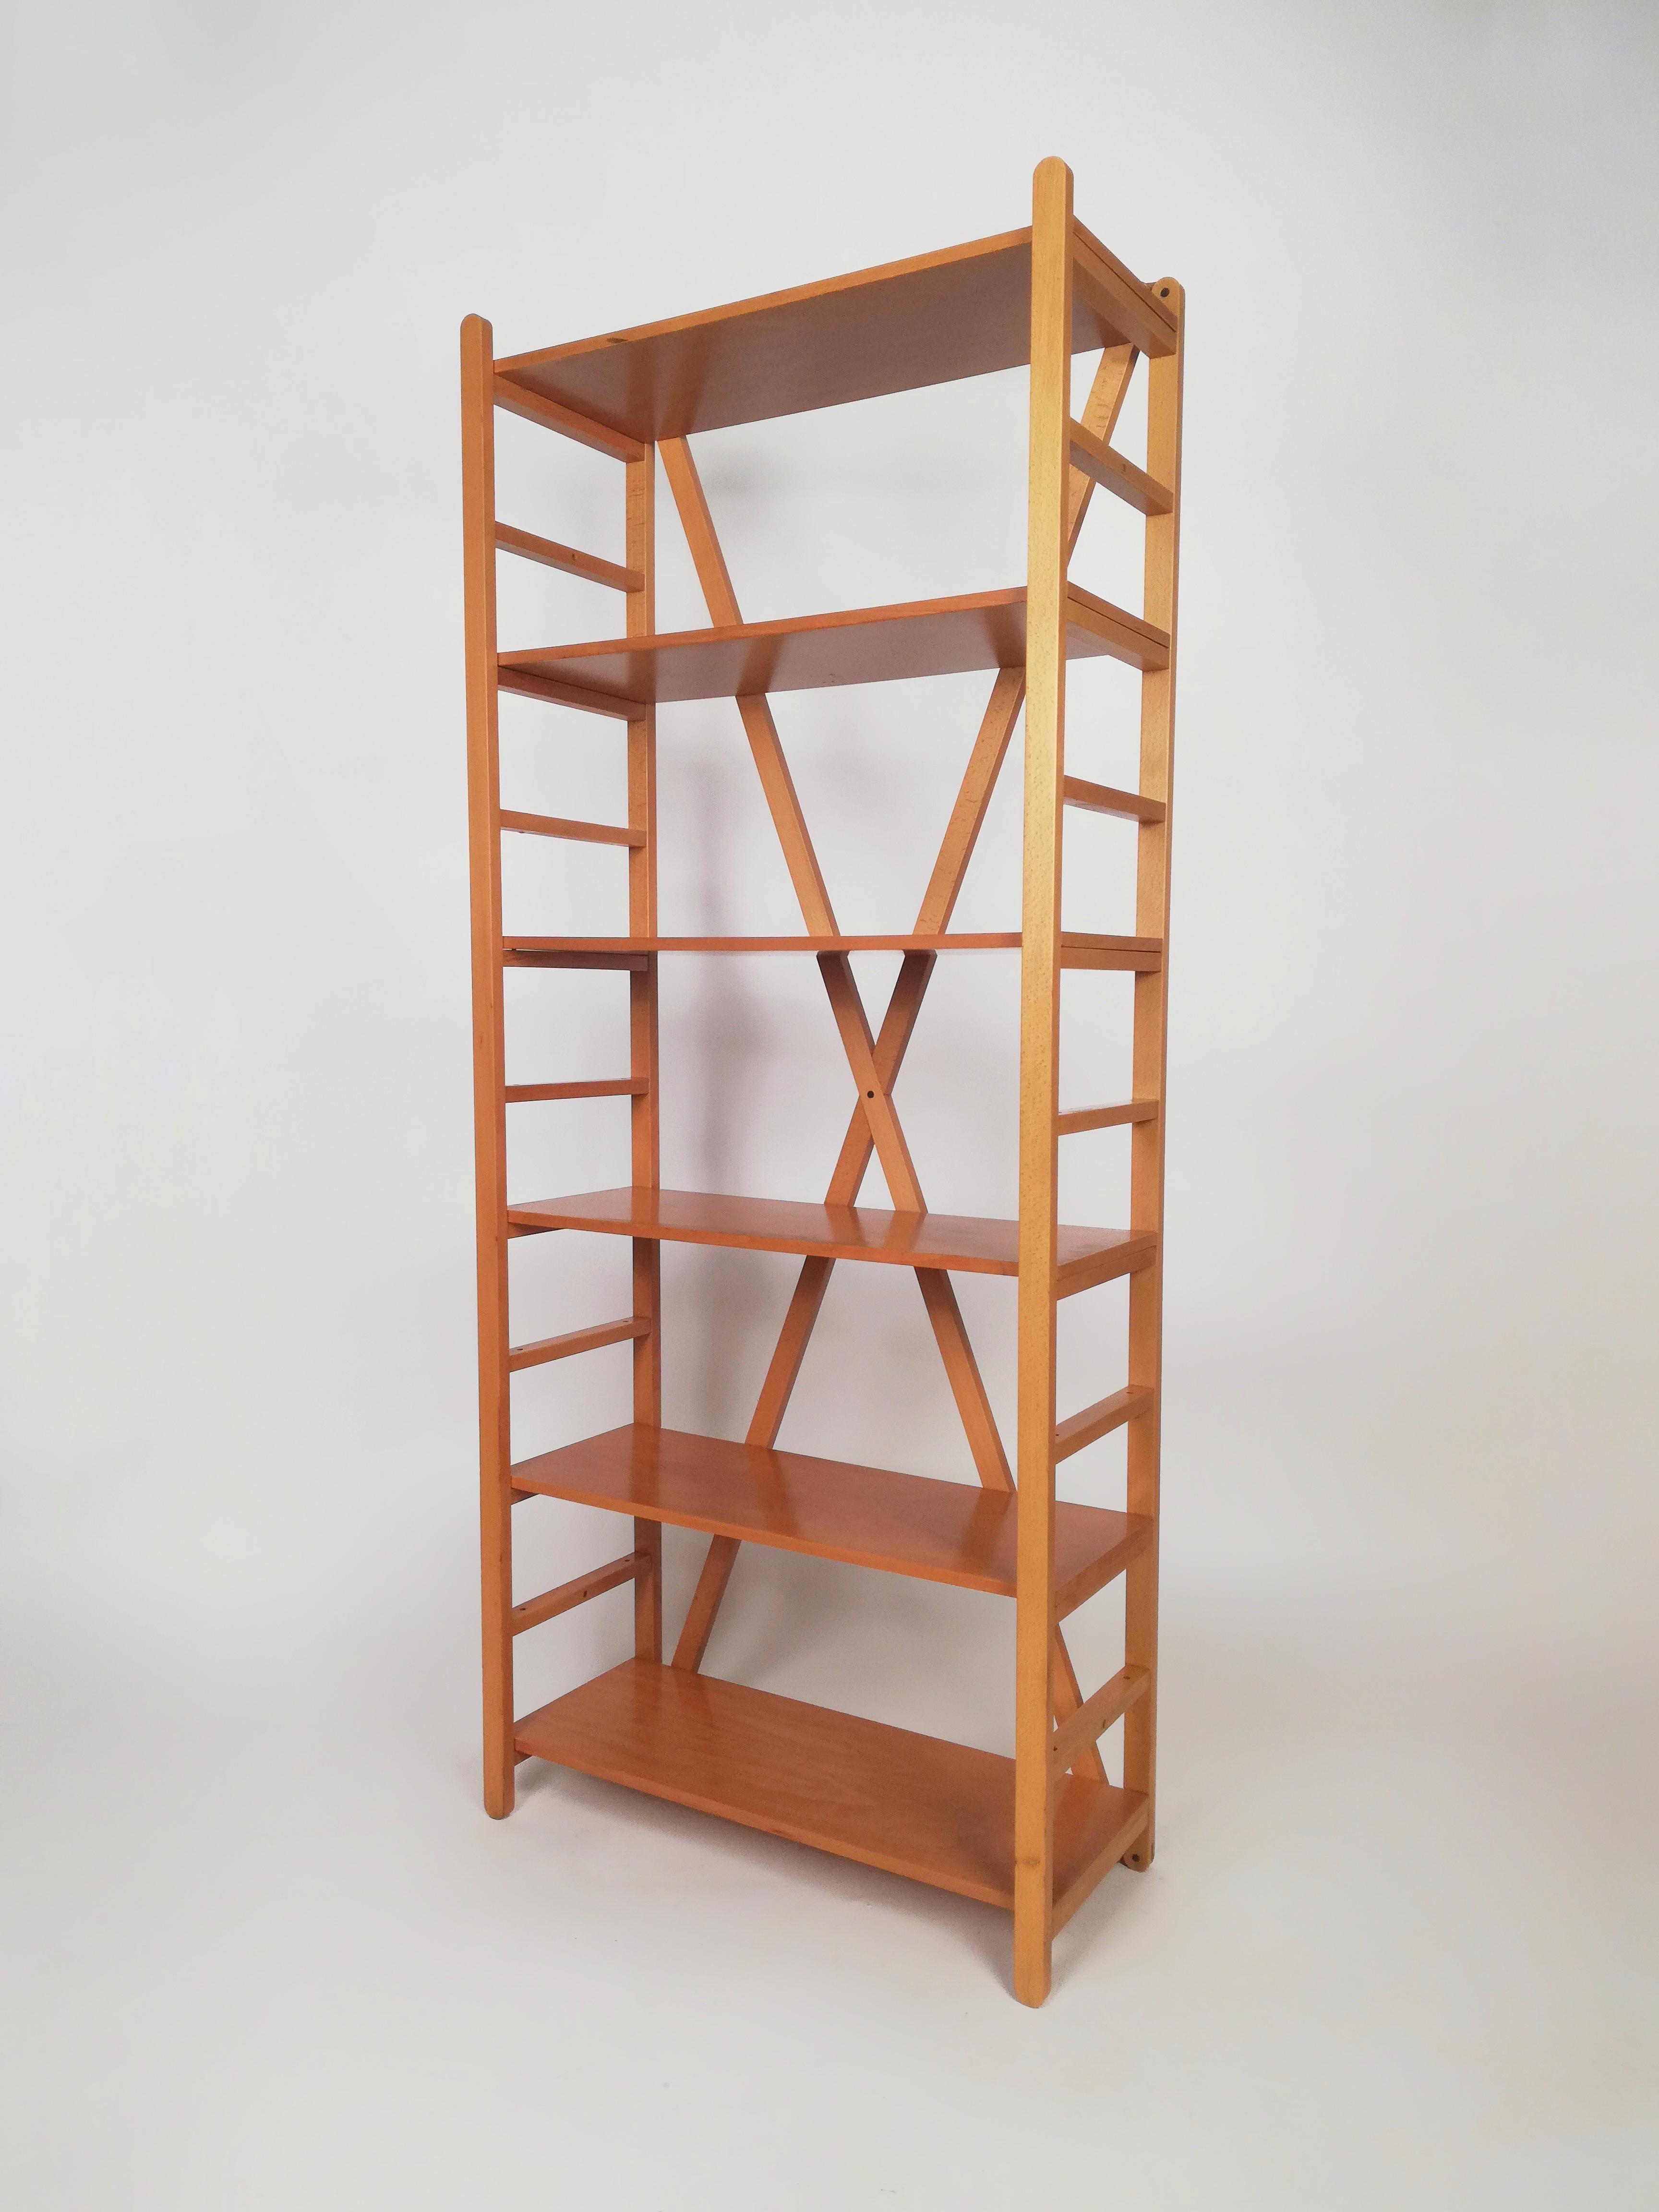 Italian Bookcase in the Style of Cassina, Made in Beech Wood Designed by Enrico Tonucci  For Sale